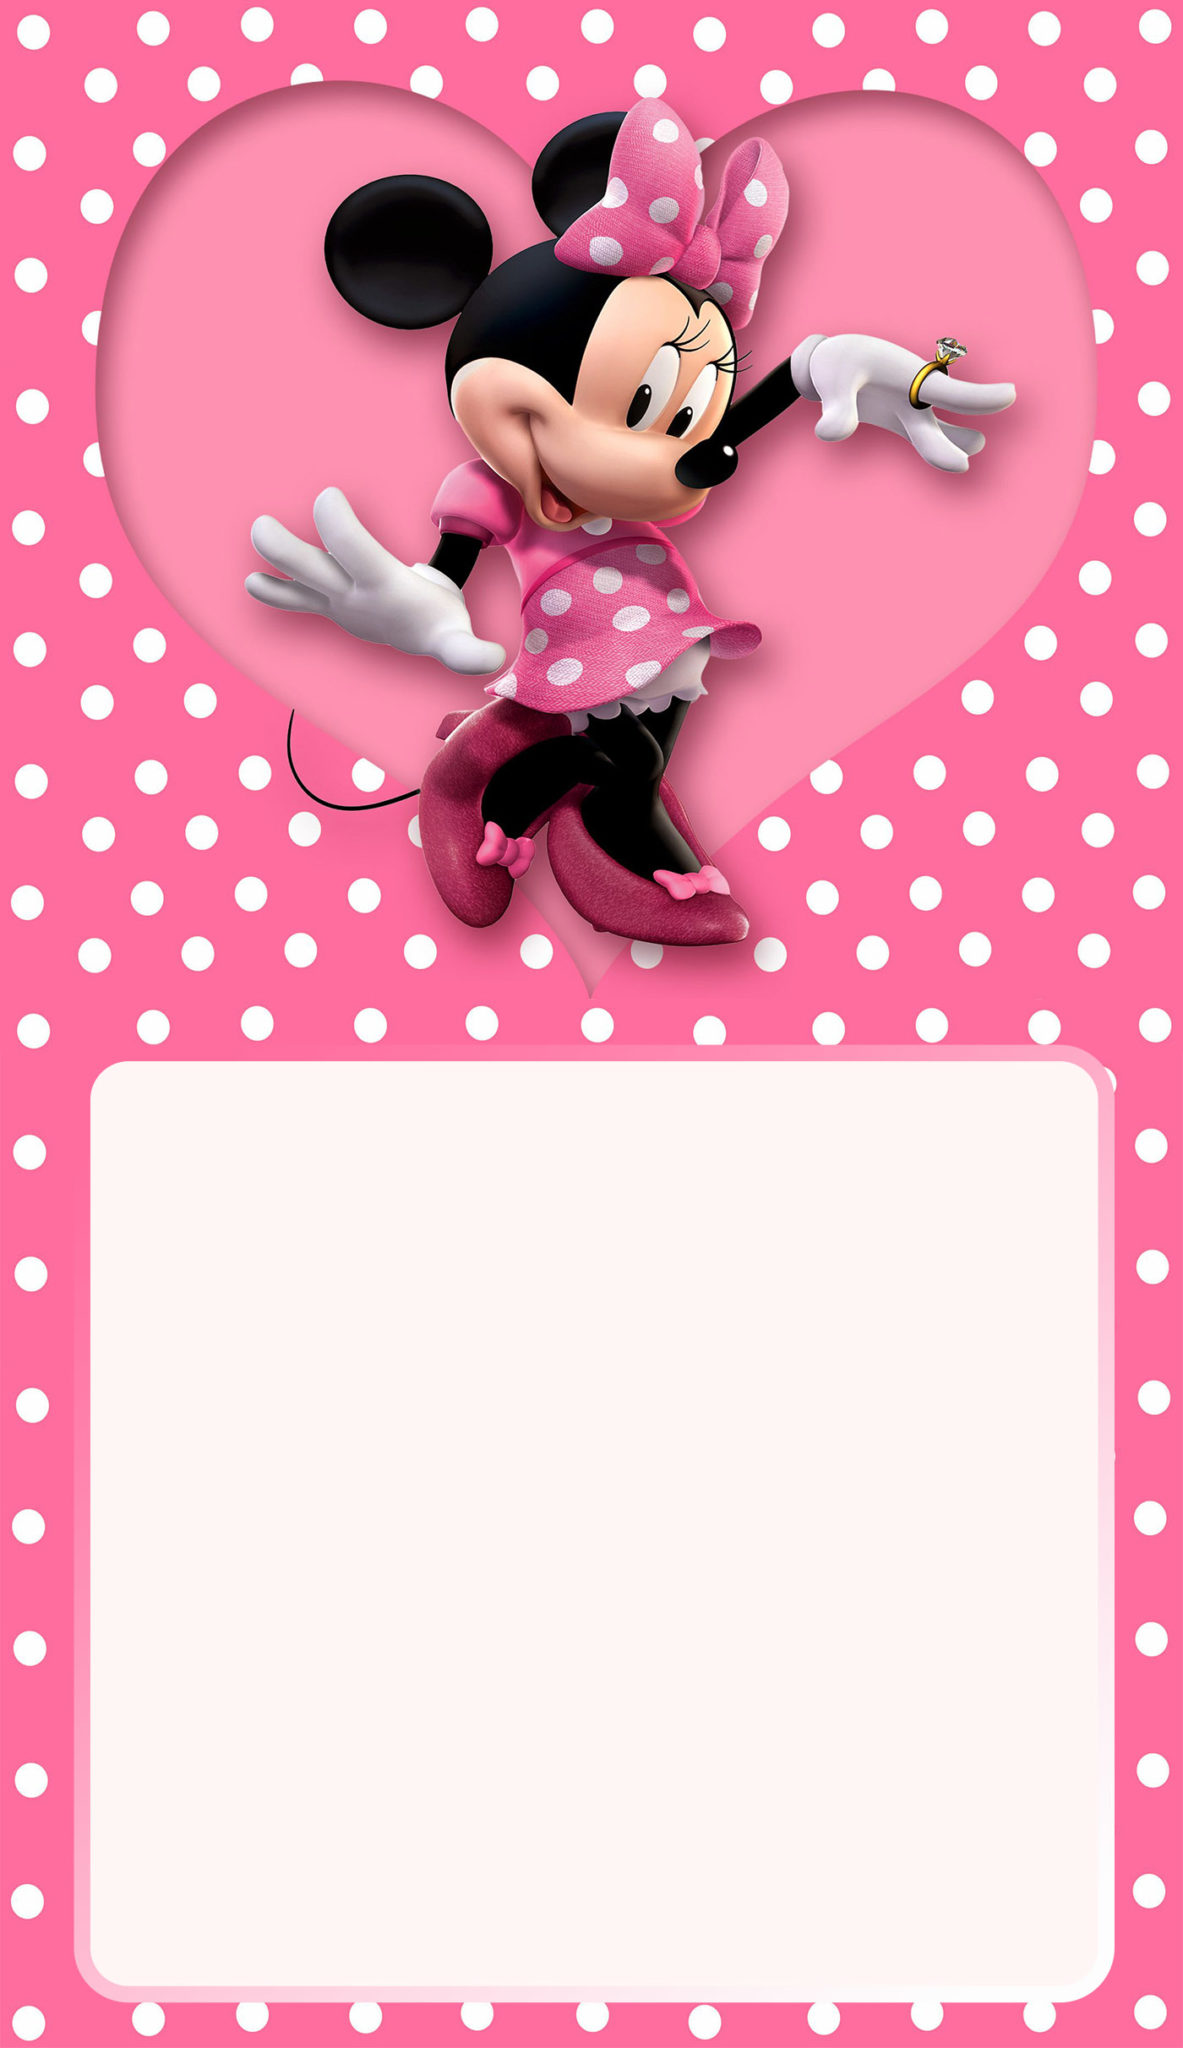 The largest collection of FREE Minnie Mouse Invitation Templates - Part 3